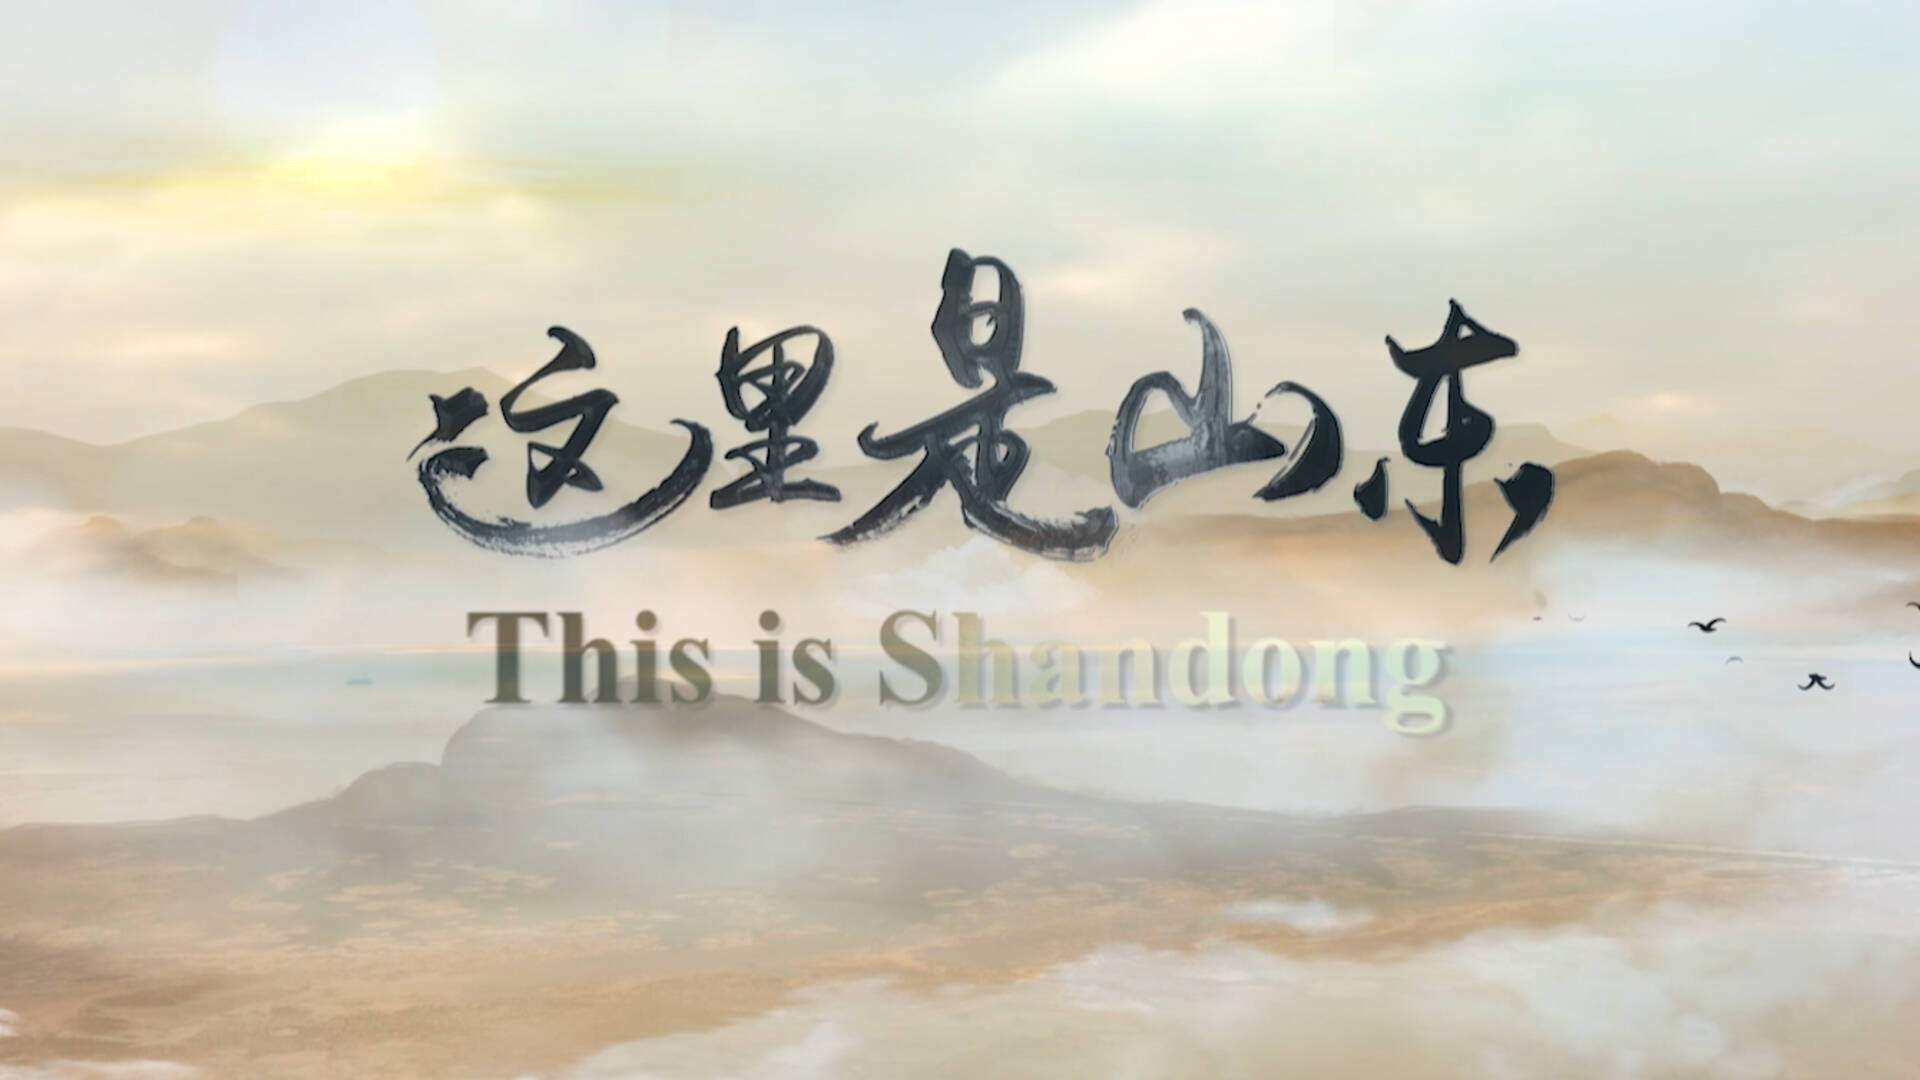 This is Shandong!